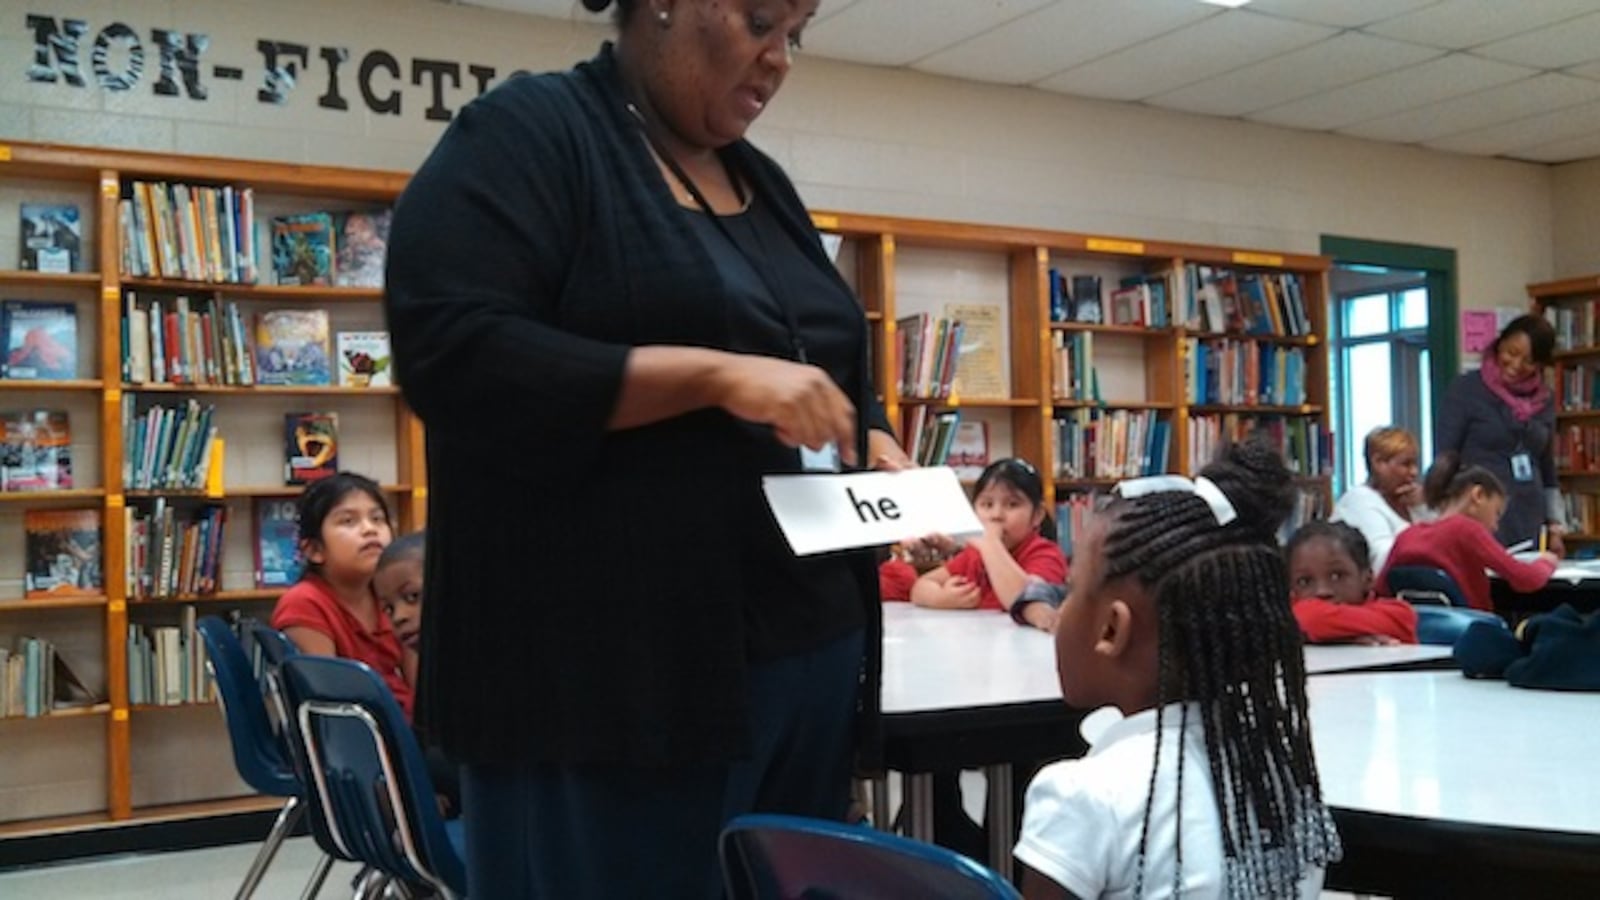 Sharpe Elementary reading interventionist Valencia Ealy works one-on-one with a student on vocabulary words last year in Memphis. Shelby County Schools has started its own program to address lagging literacy scores.